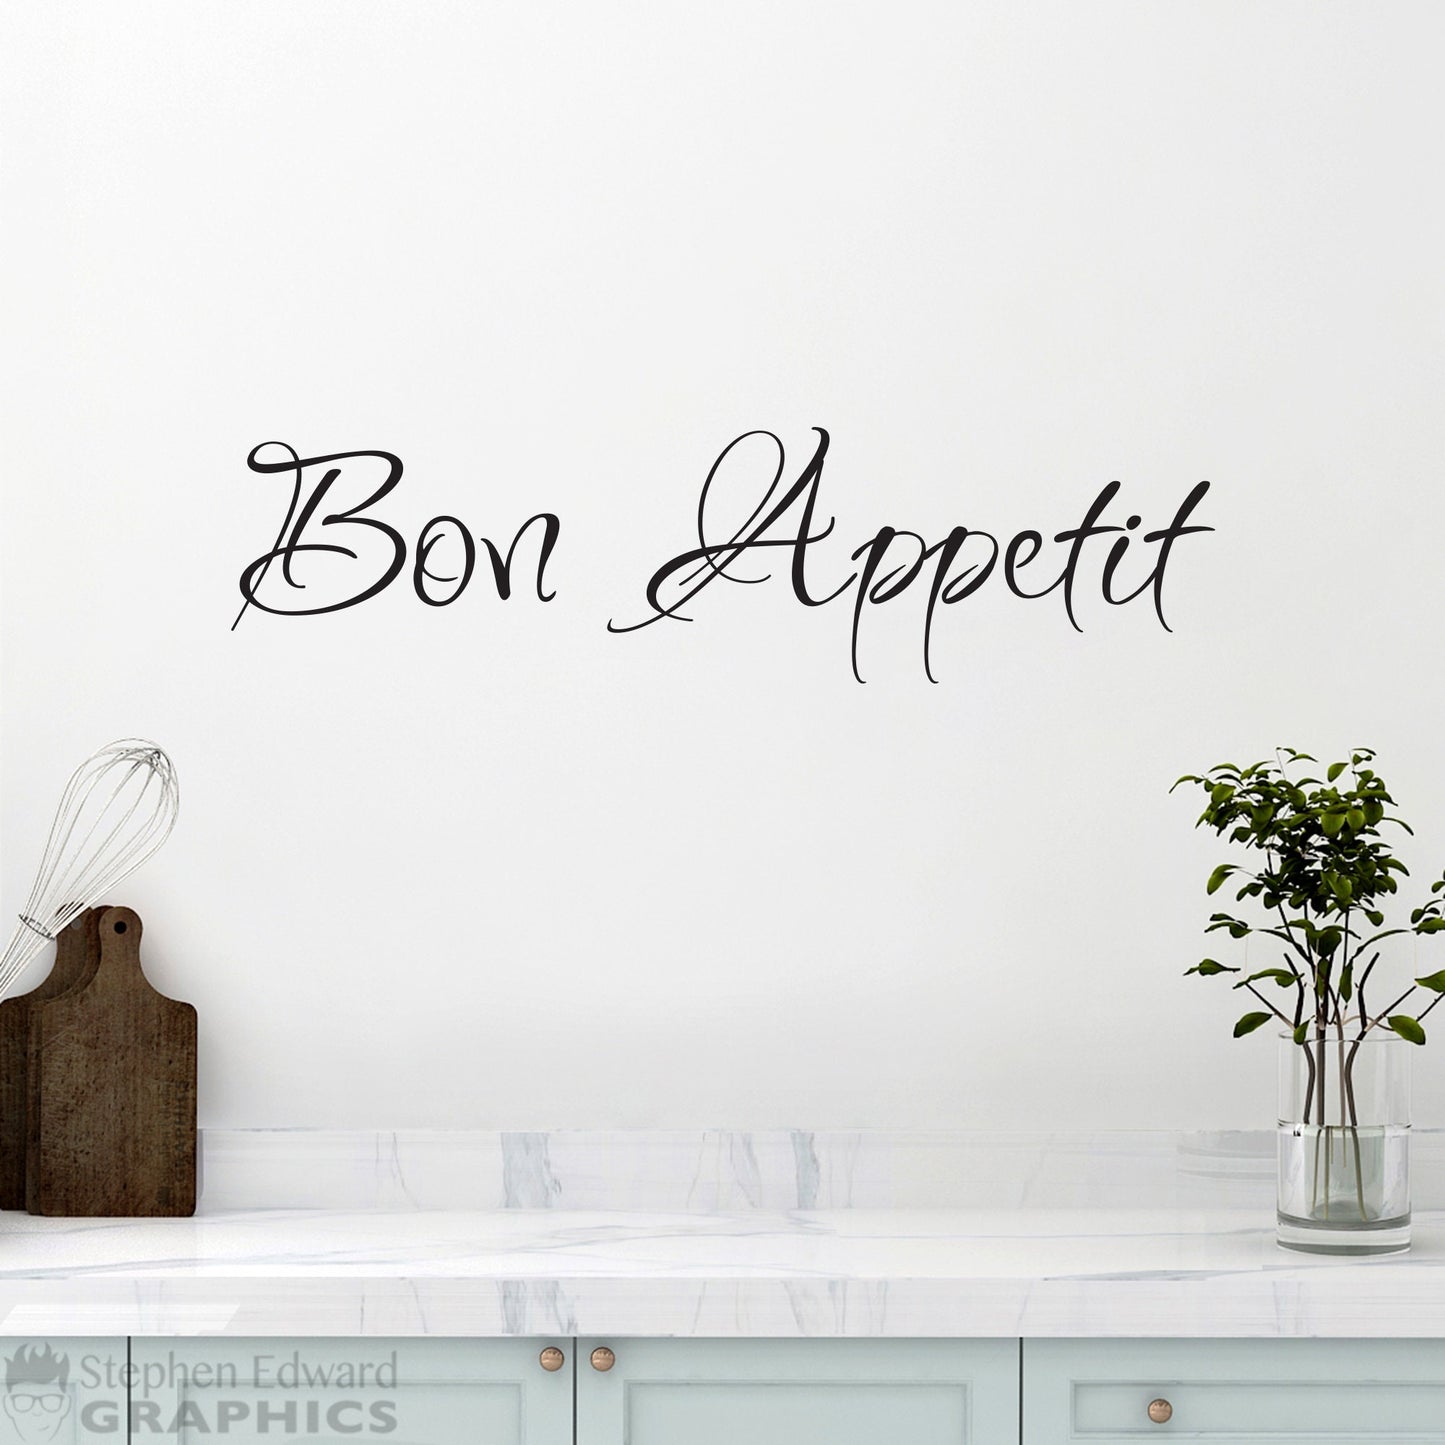 Bon Appetit Decal | Kitchen Decor | French Wall Art | Dining Room Wall Decal | Ver. 1